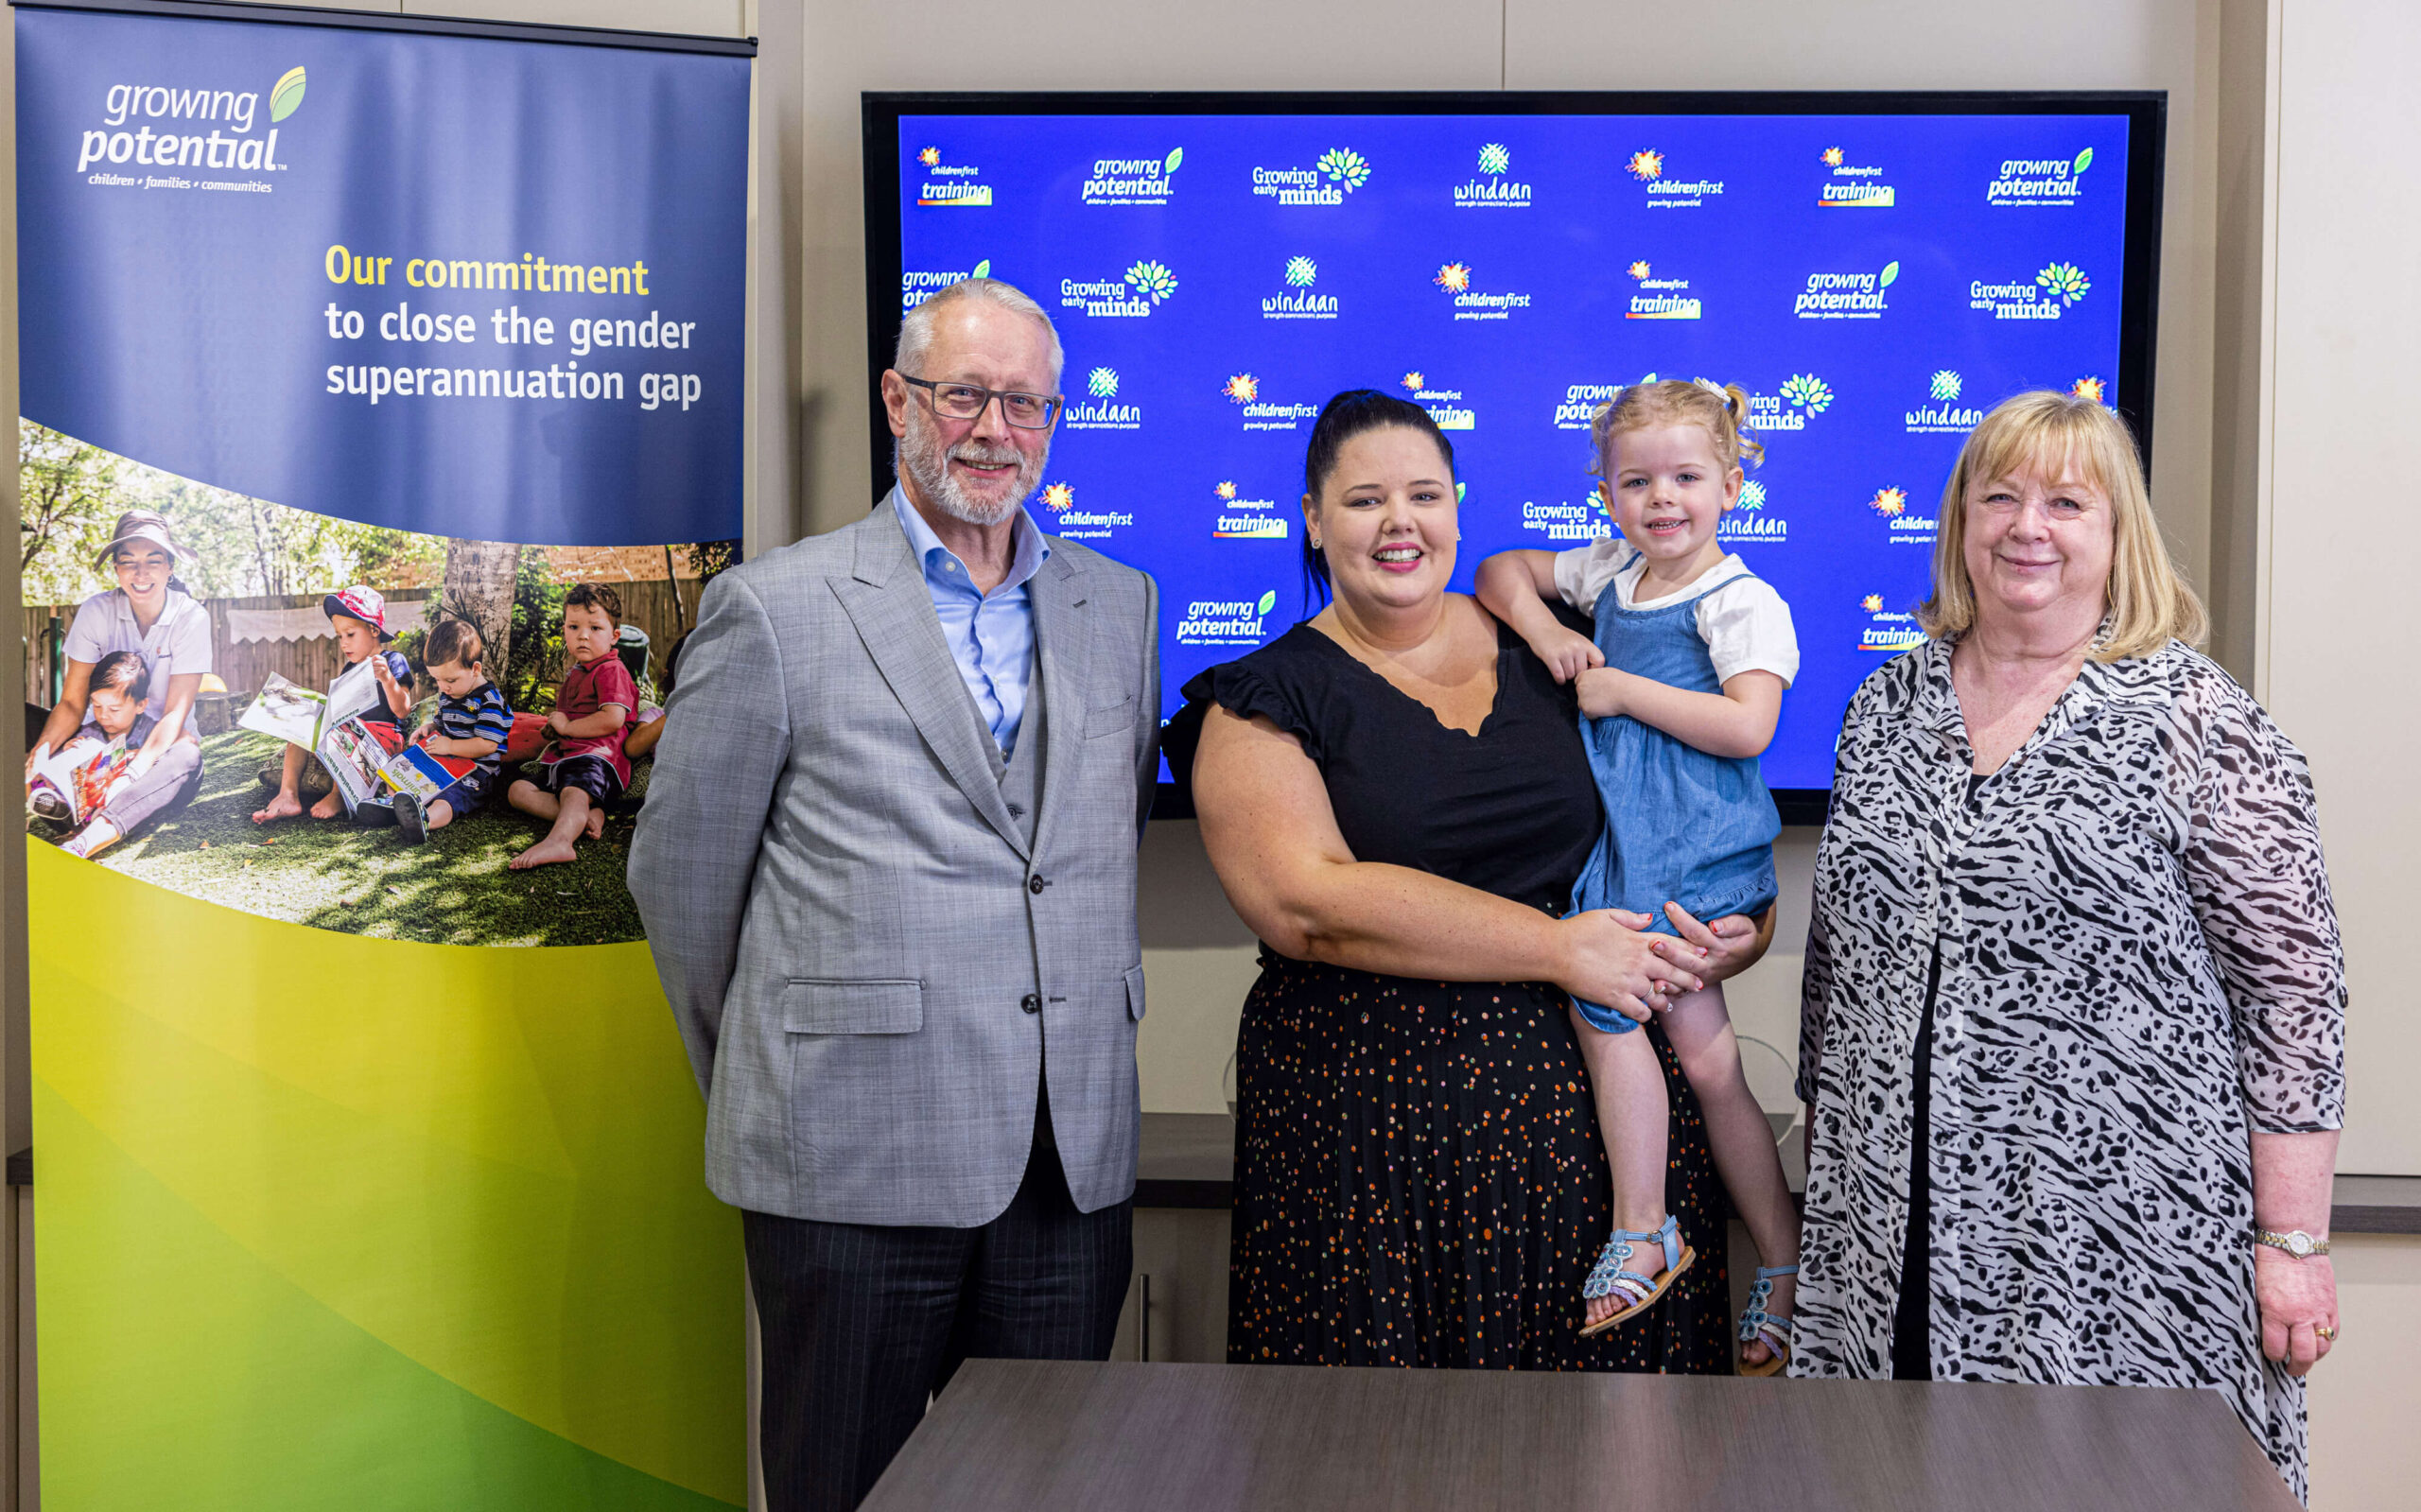 Group photo of Growing Potential's CEO Otto Henfling, Chair of the Board Carol Vella, and Employee Relations Coordinator Ashleigh Bender with her 3 year old daughter Lola, taken in a boardroom